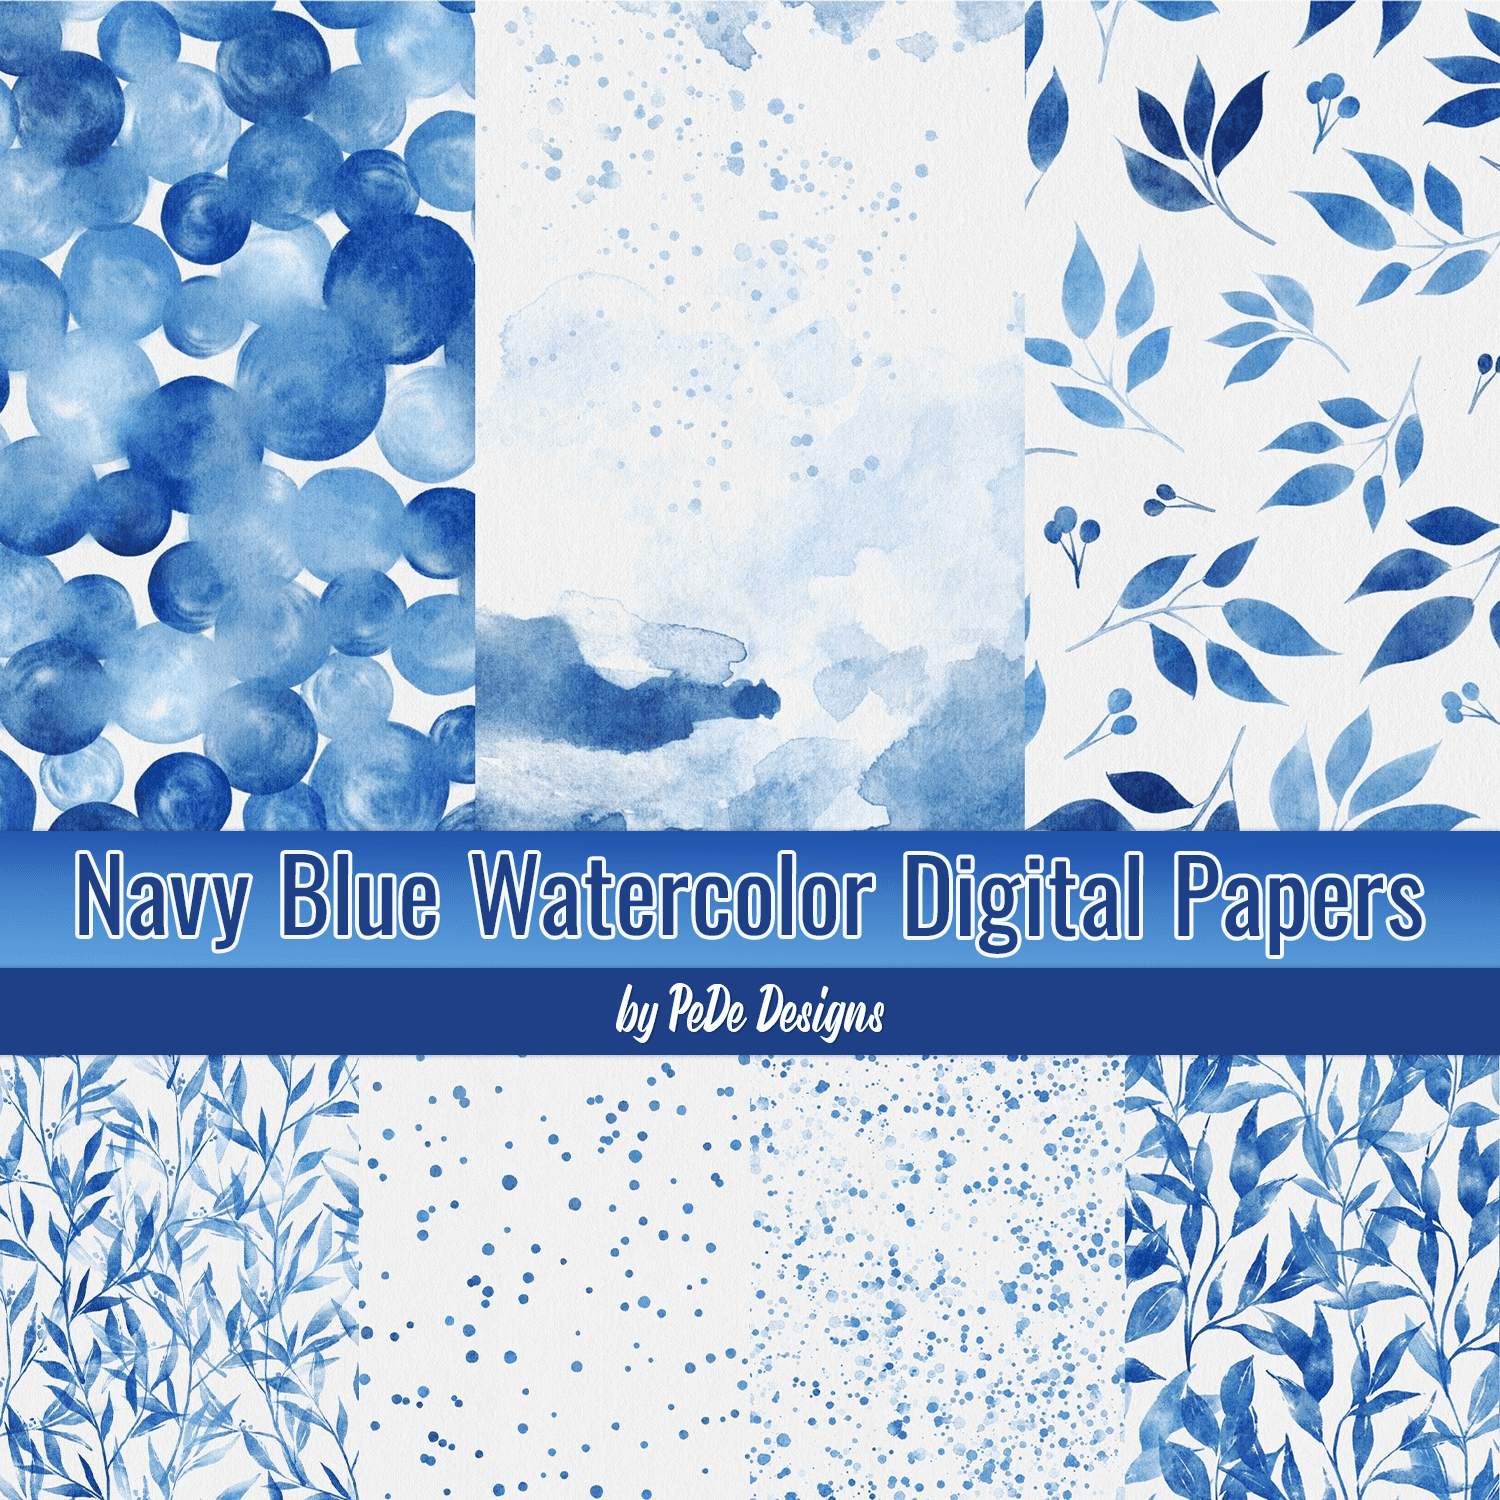 Navy Blue Watercolor Digital Papers Cover.